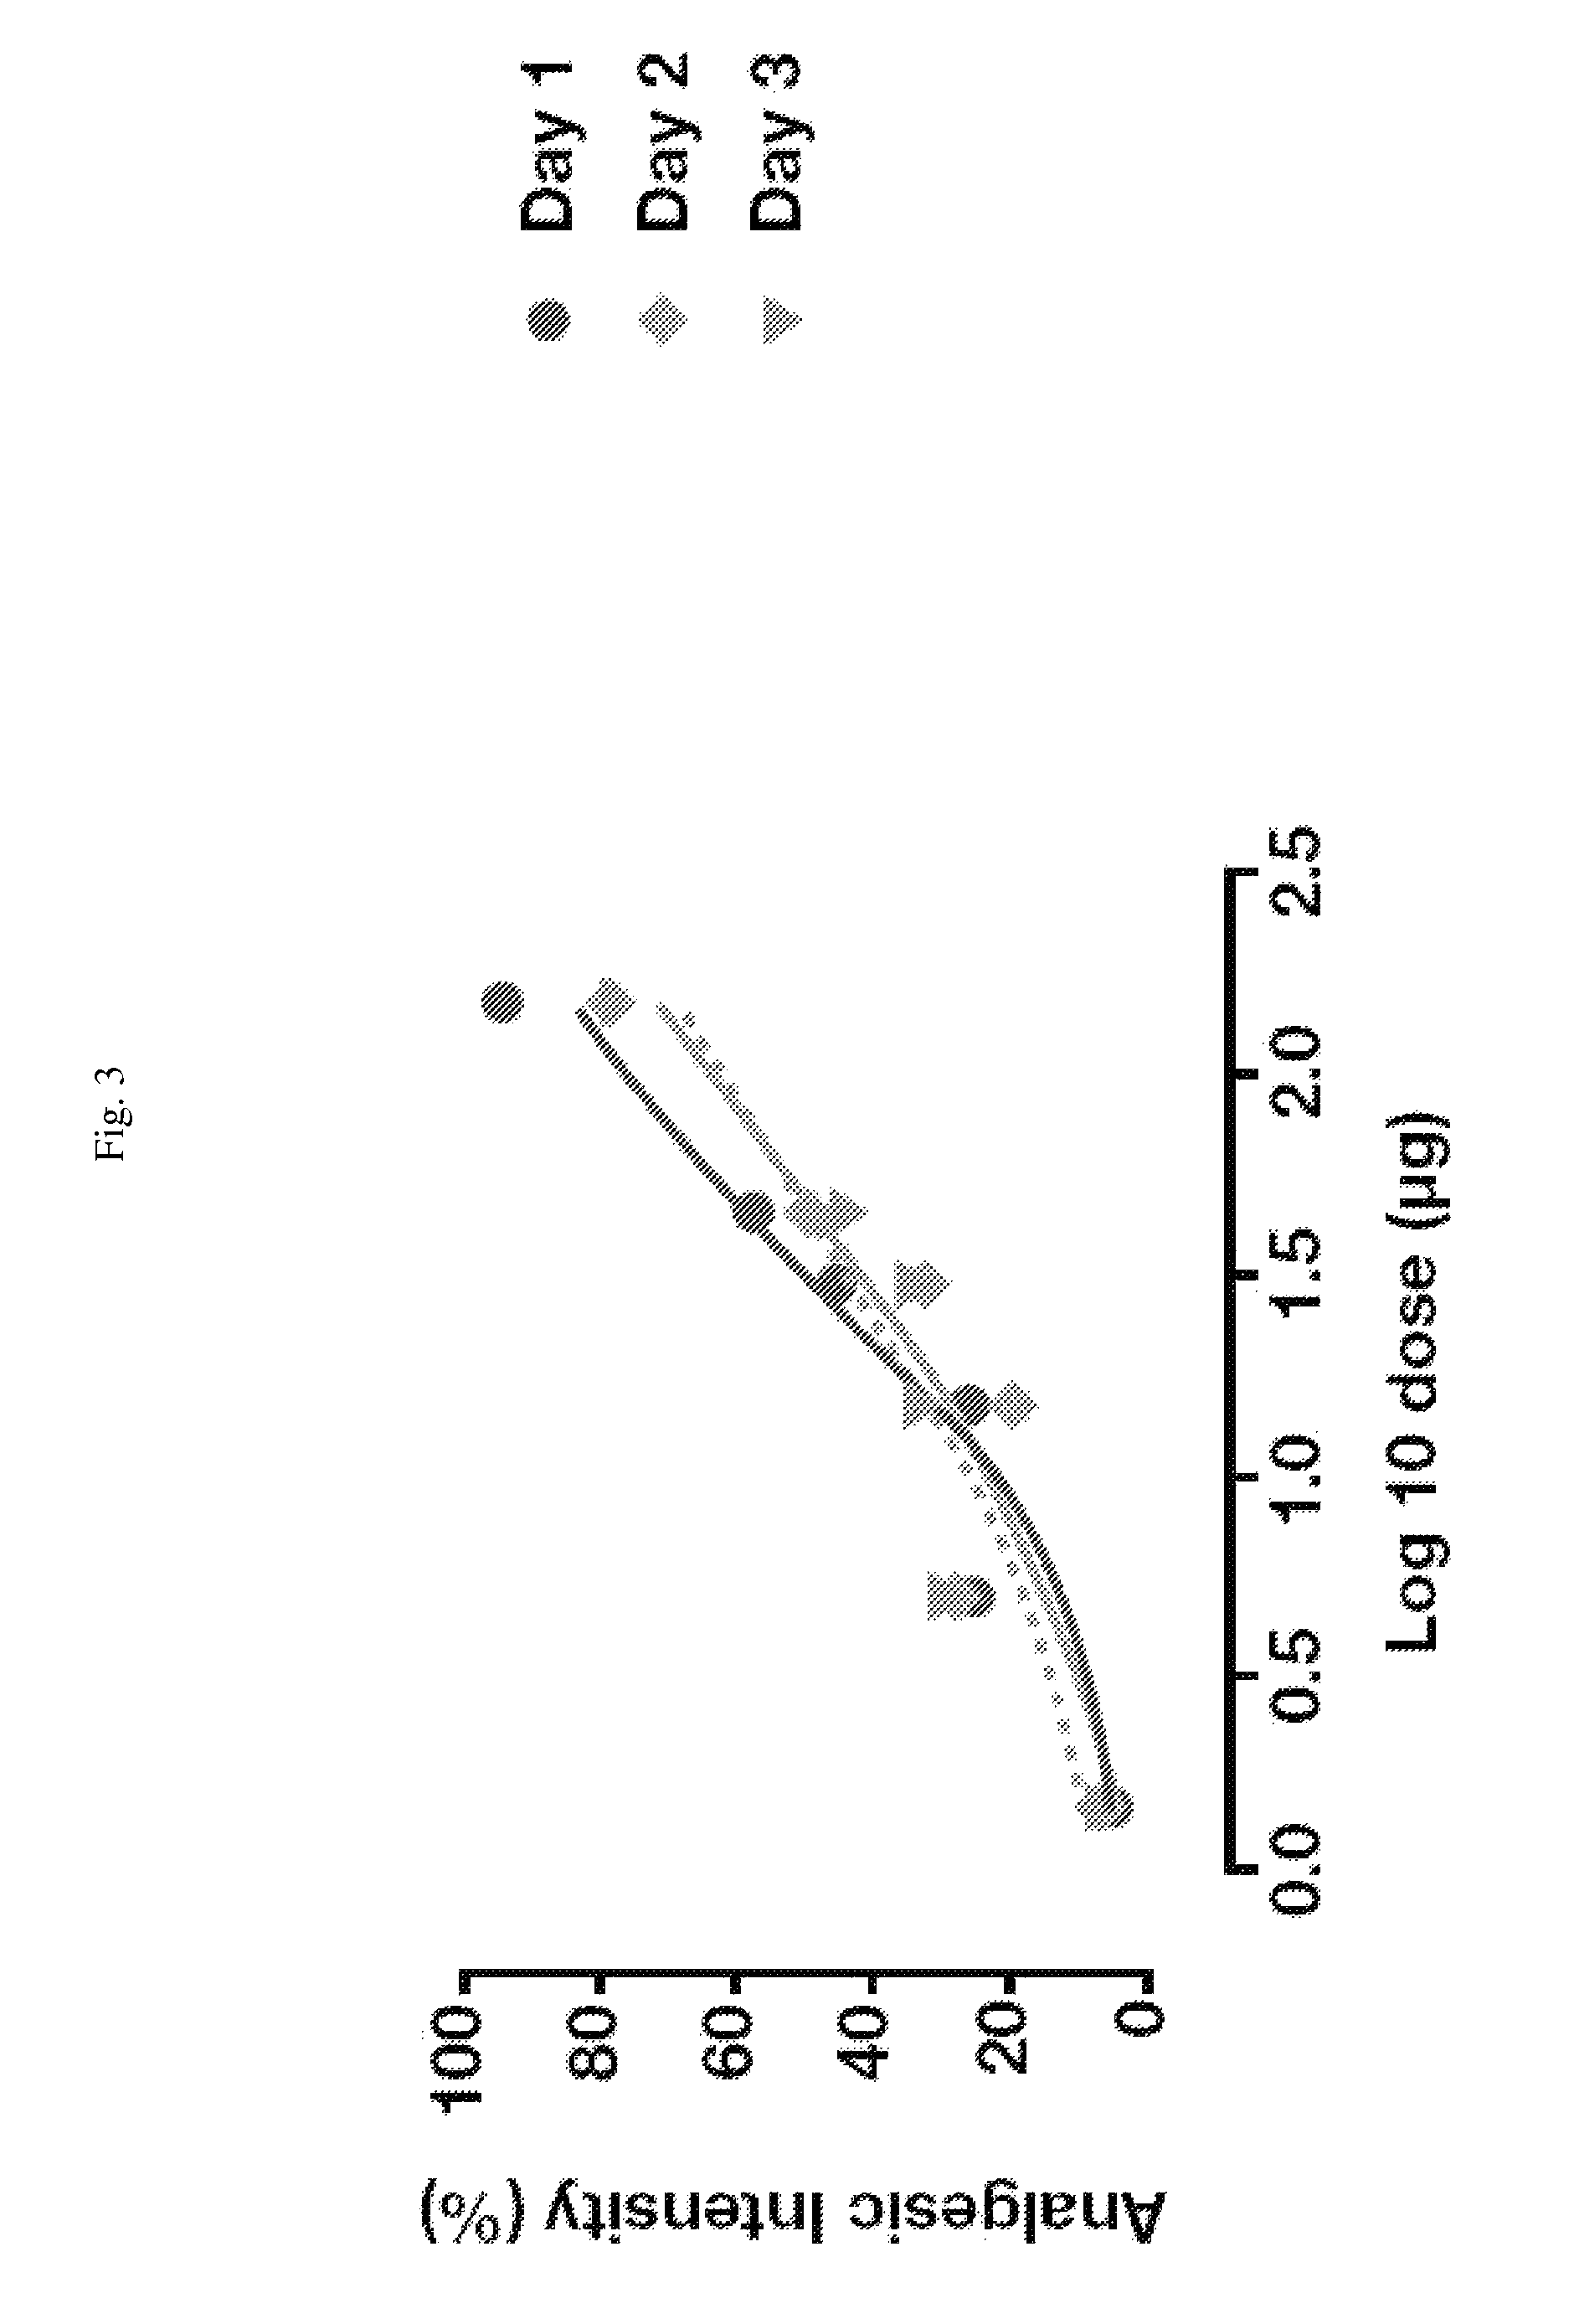 Instillation administration of capsaicinoids for the treatment of pain